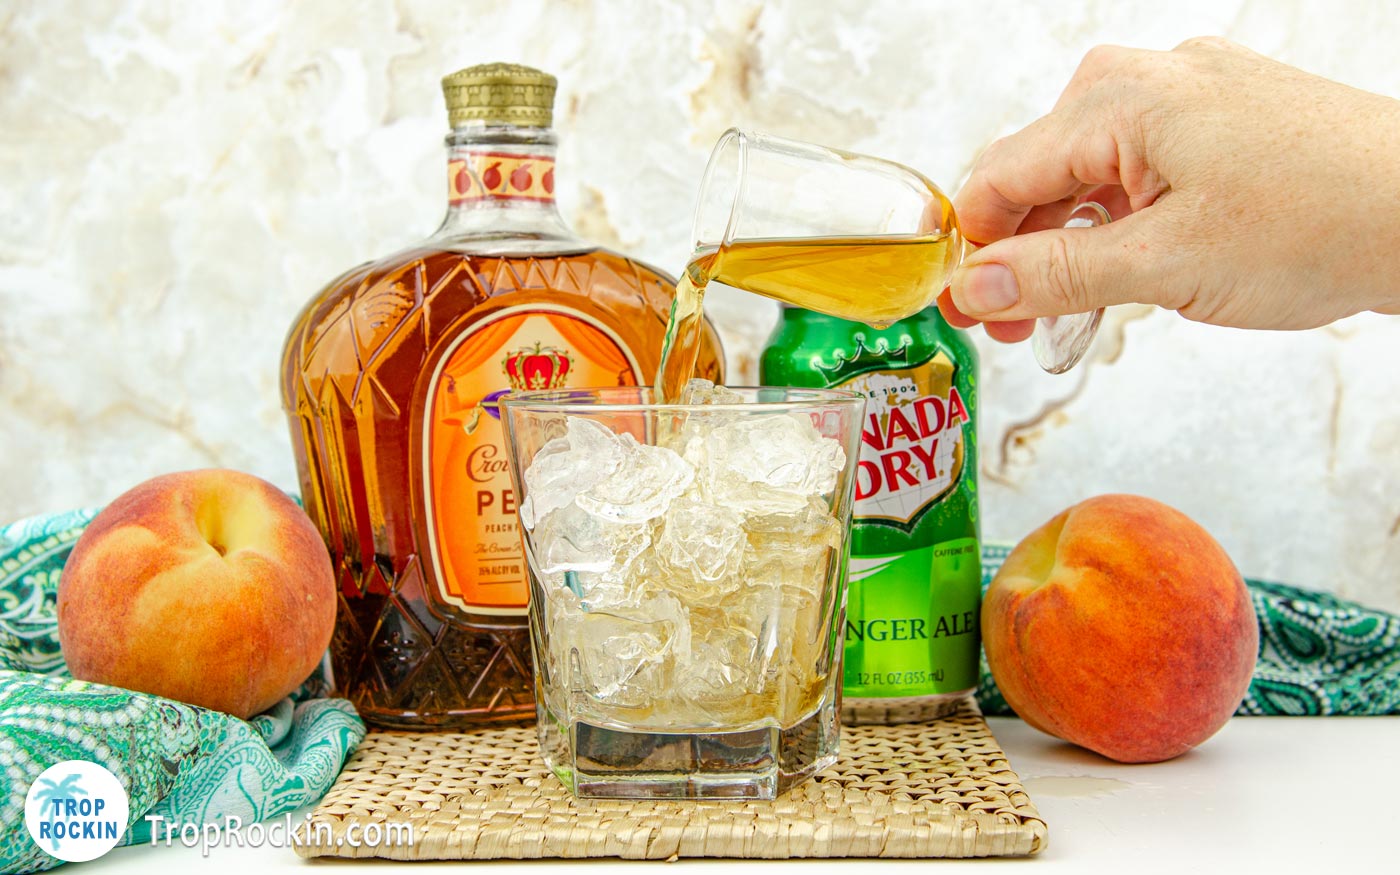 Pouring crown royal peach whisky into cocktail glass filled with ice.